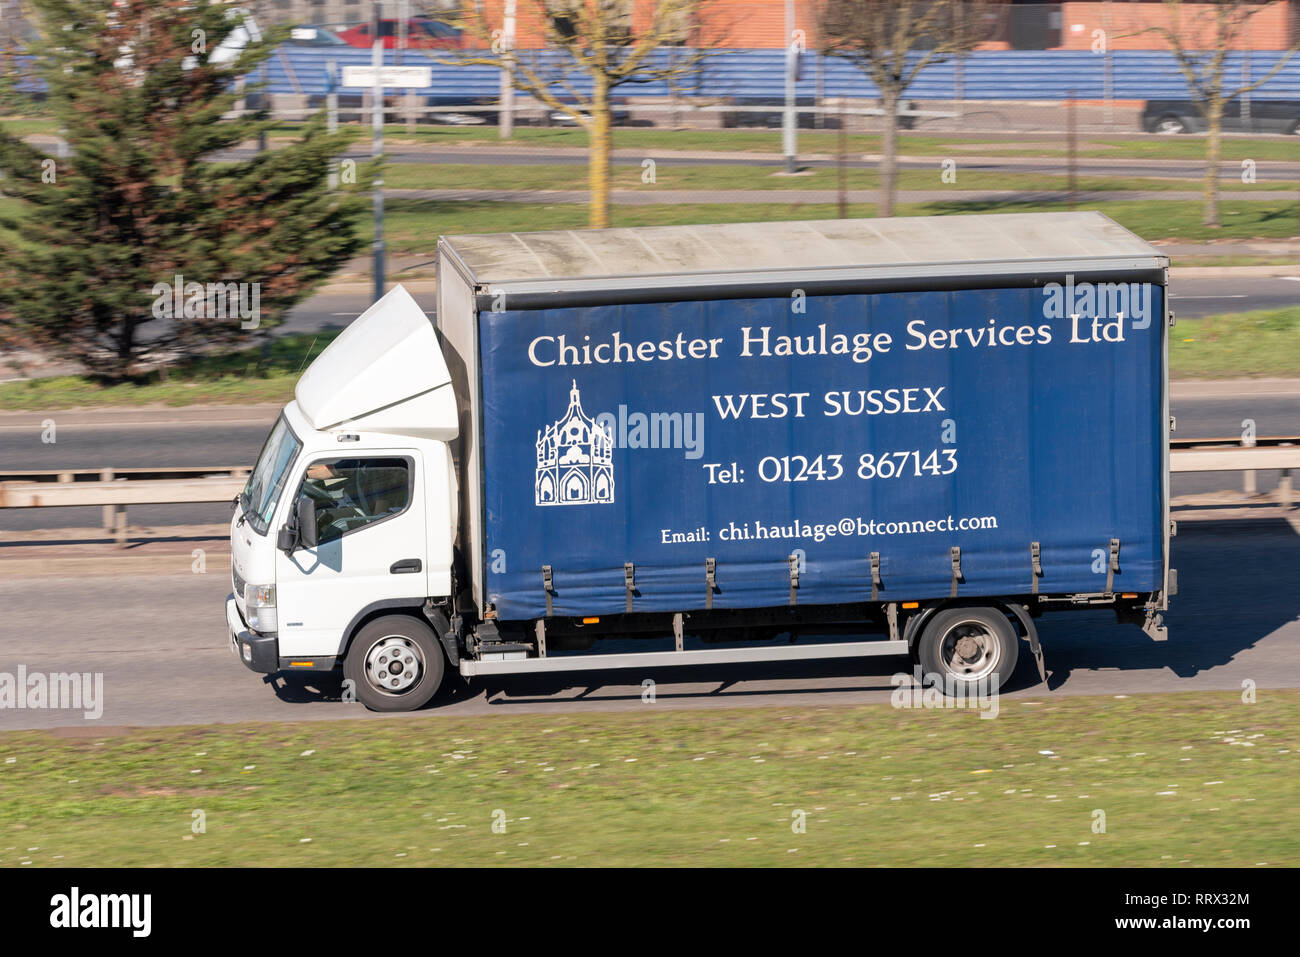 Chichester Haulage Services Ltd tautliner curtain side lorry, truck, vehicle. Stock Photo